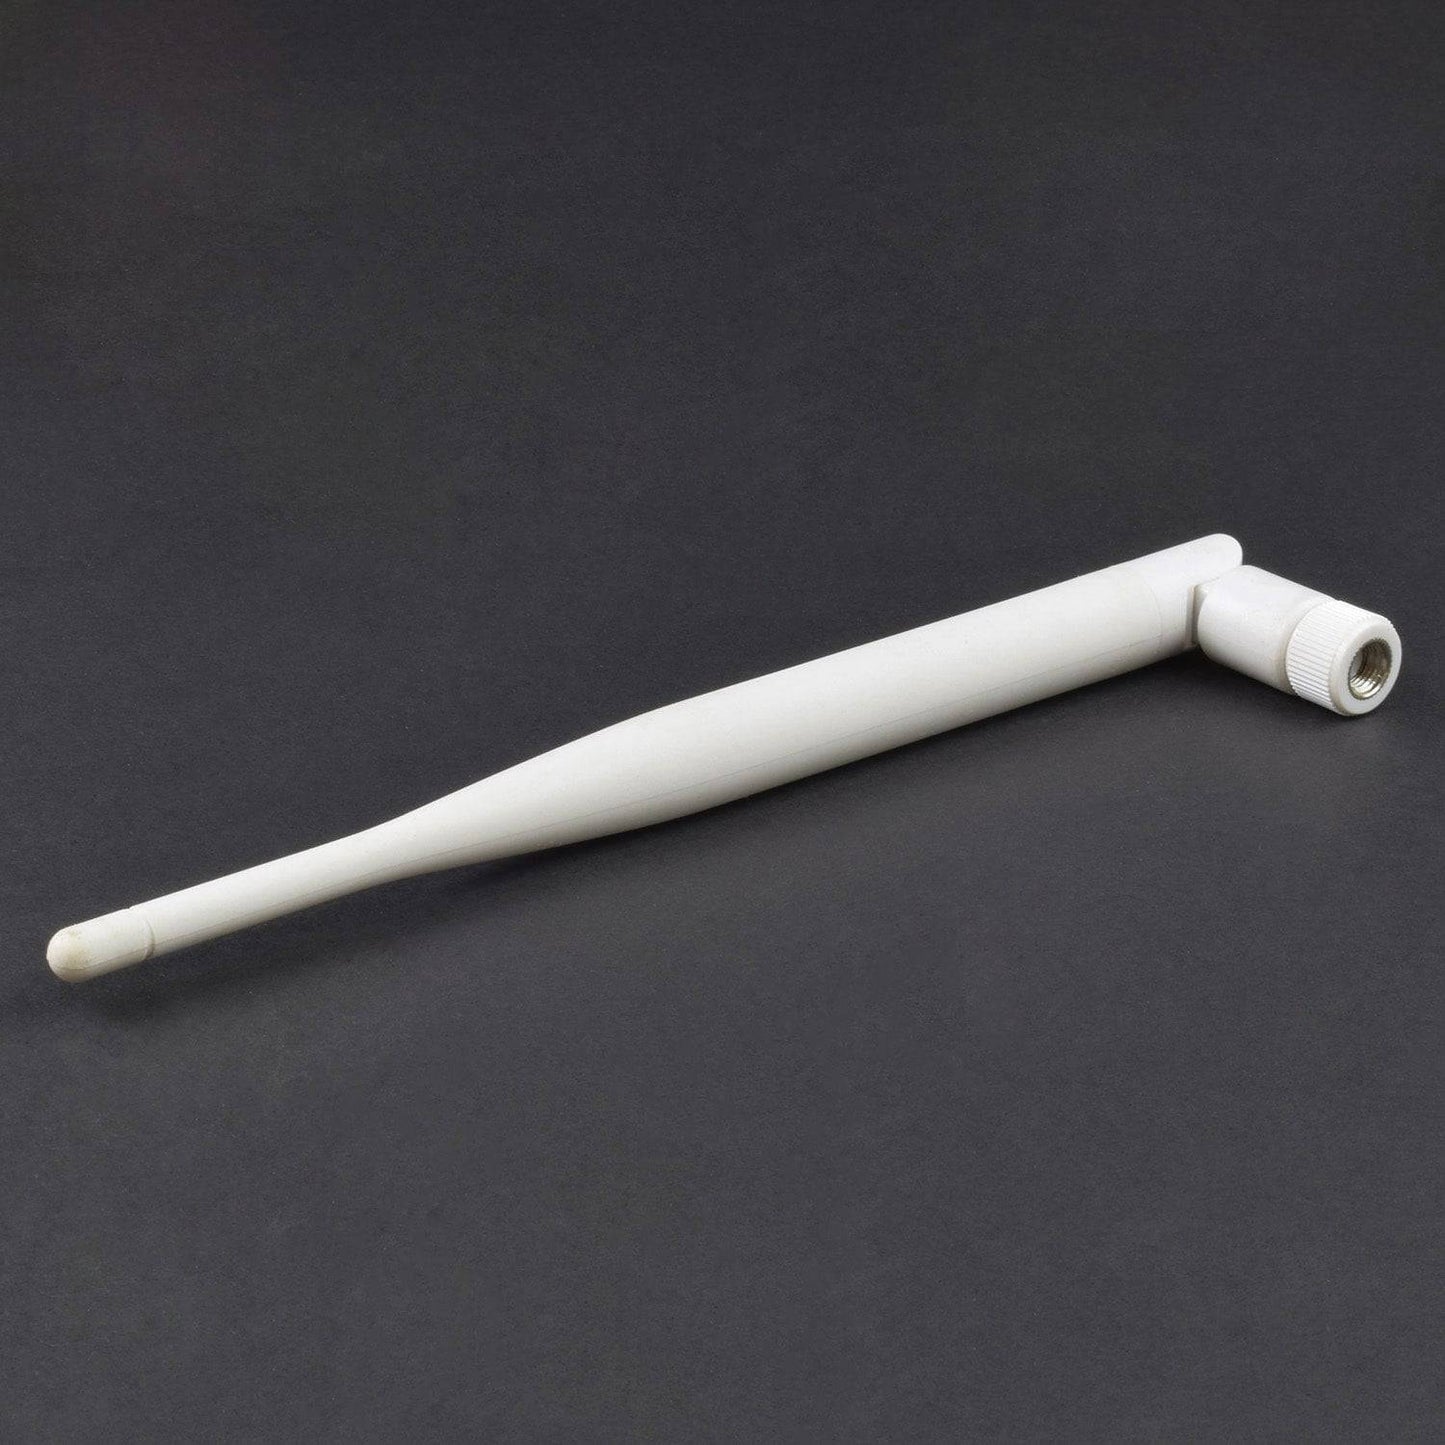 2.4GHz 3.2dBi RP-SMA Omni Antenna for WiFi -RS032 - REES52